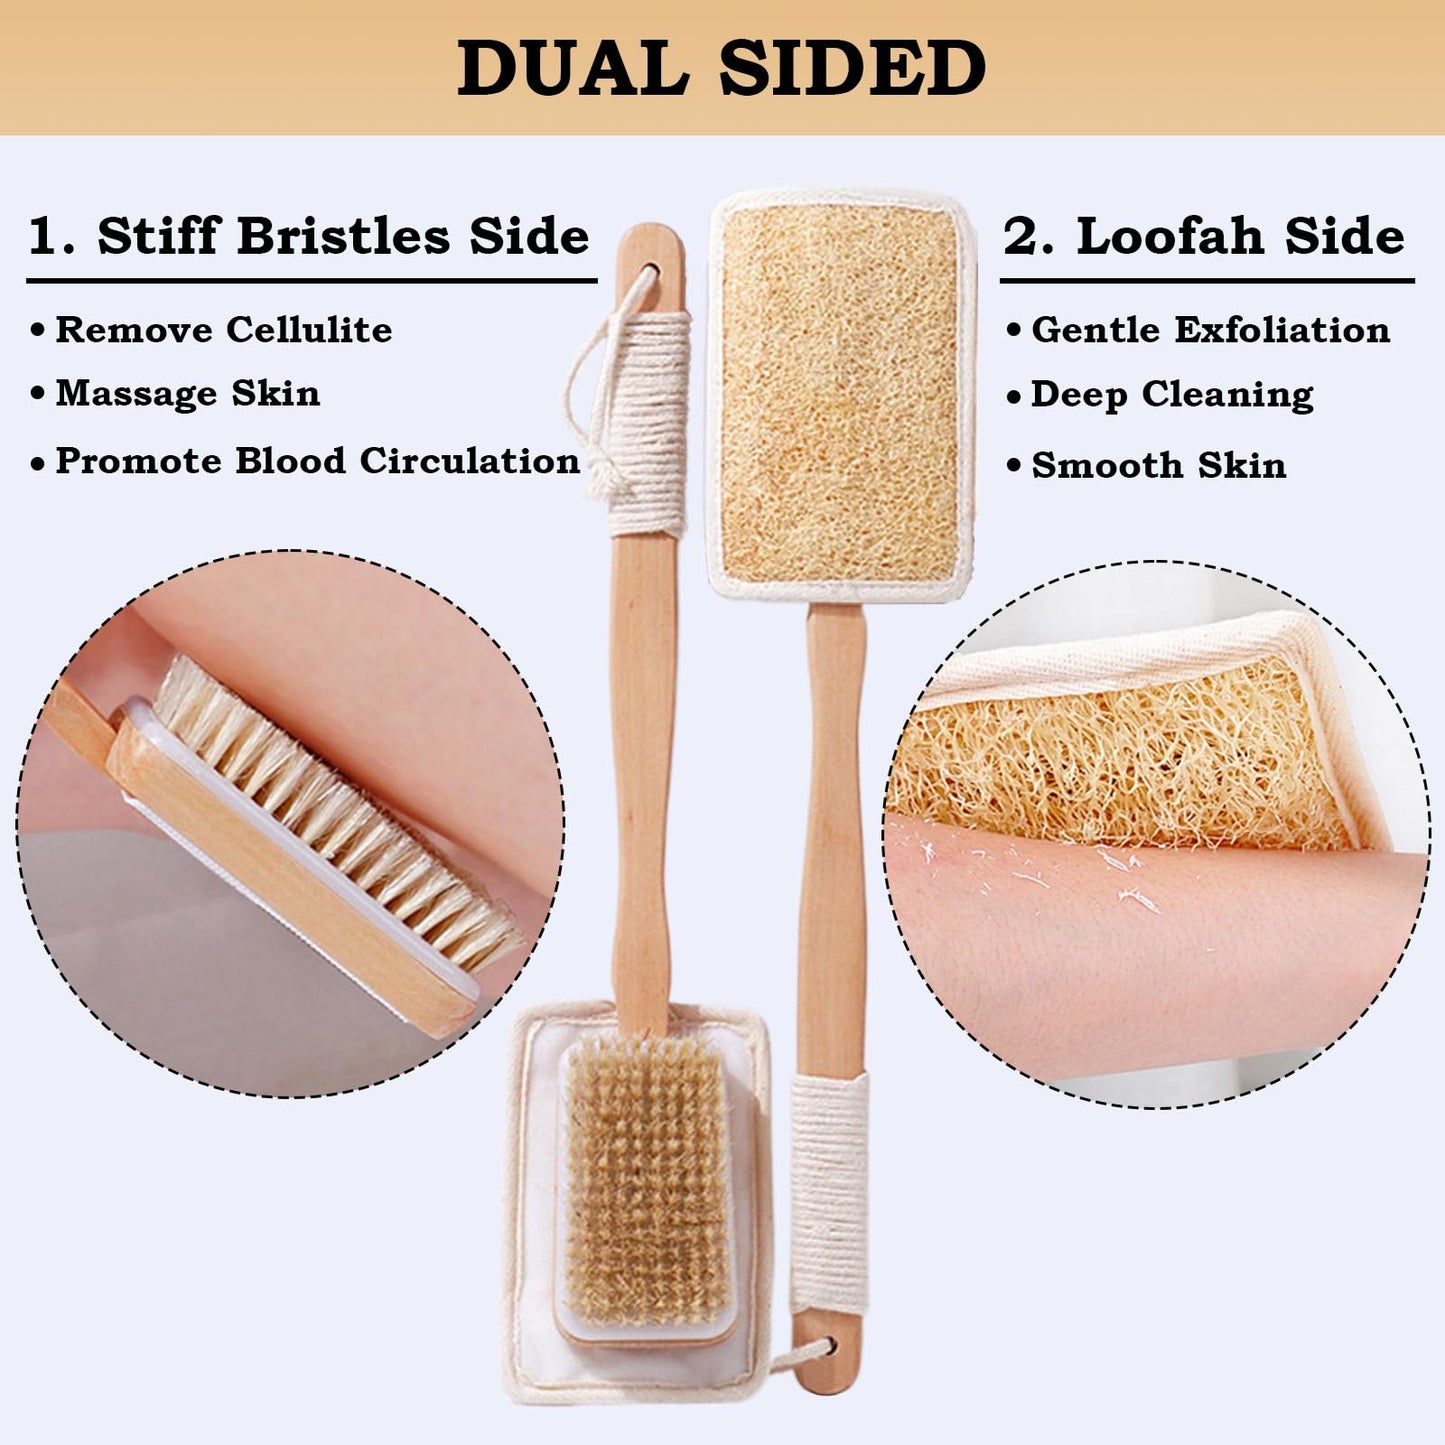 DAKOUDAI Back Scrubber for Shower with Bristles and Loofah, Body Scrubber for Exfoliating and Massage with Curved Long Handle, Wet or Dry Brushing Body Brush (1 x Bristles & Loofah Brush)